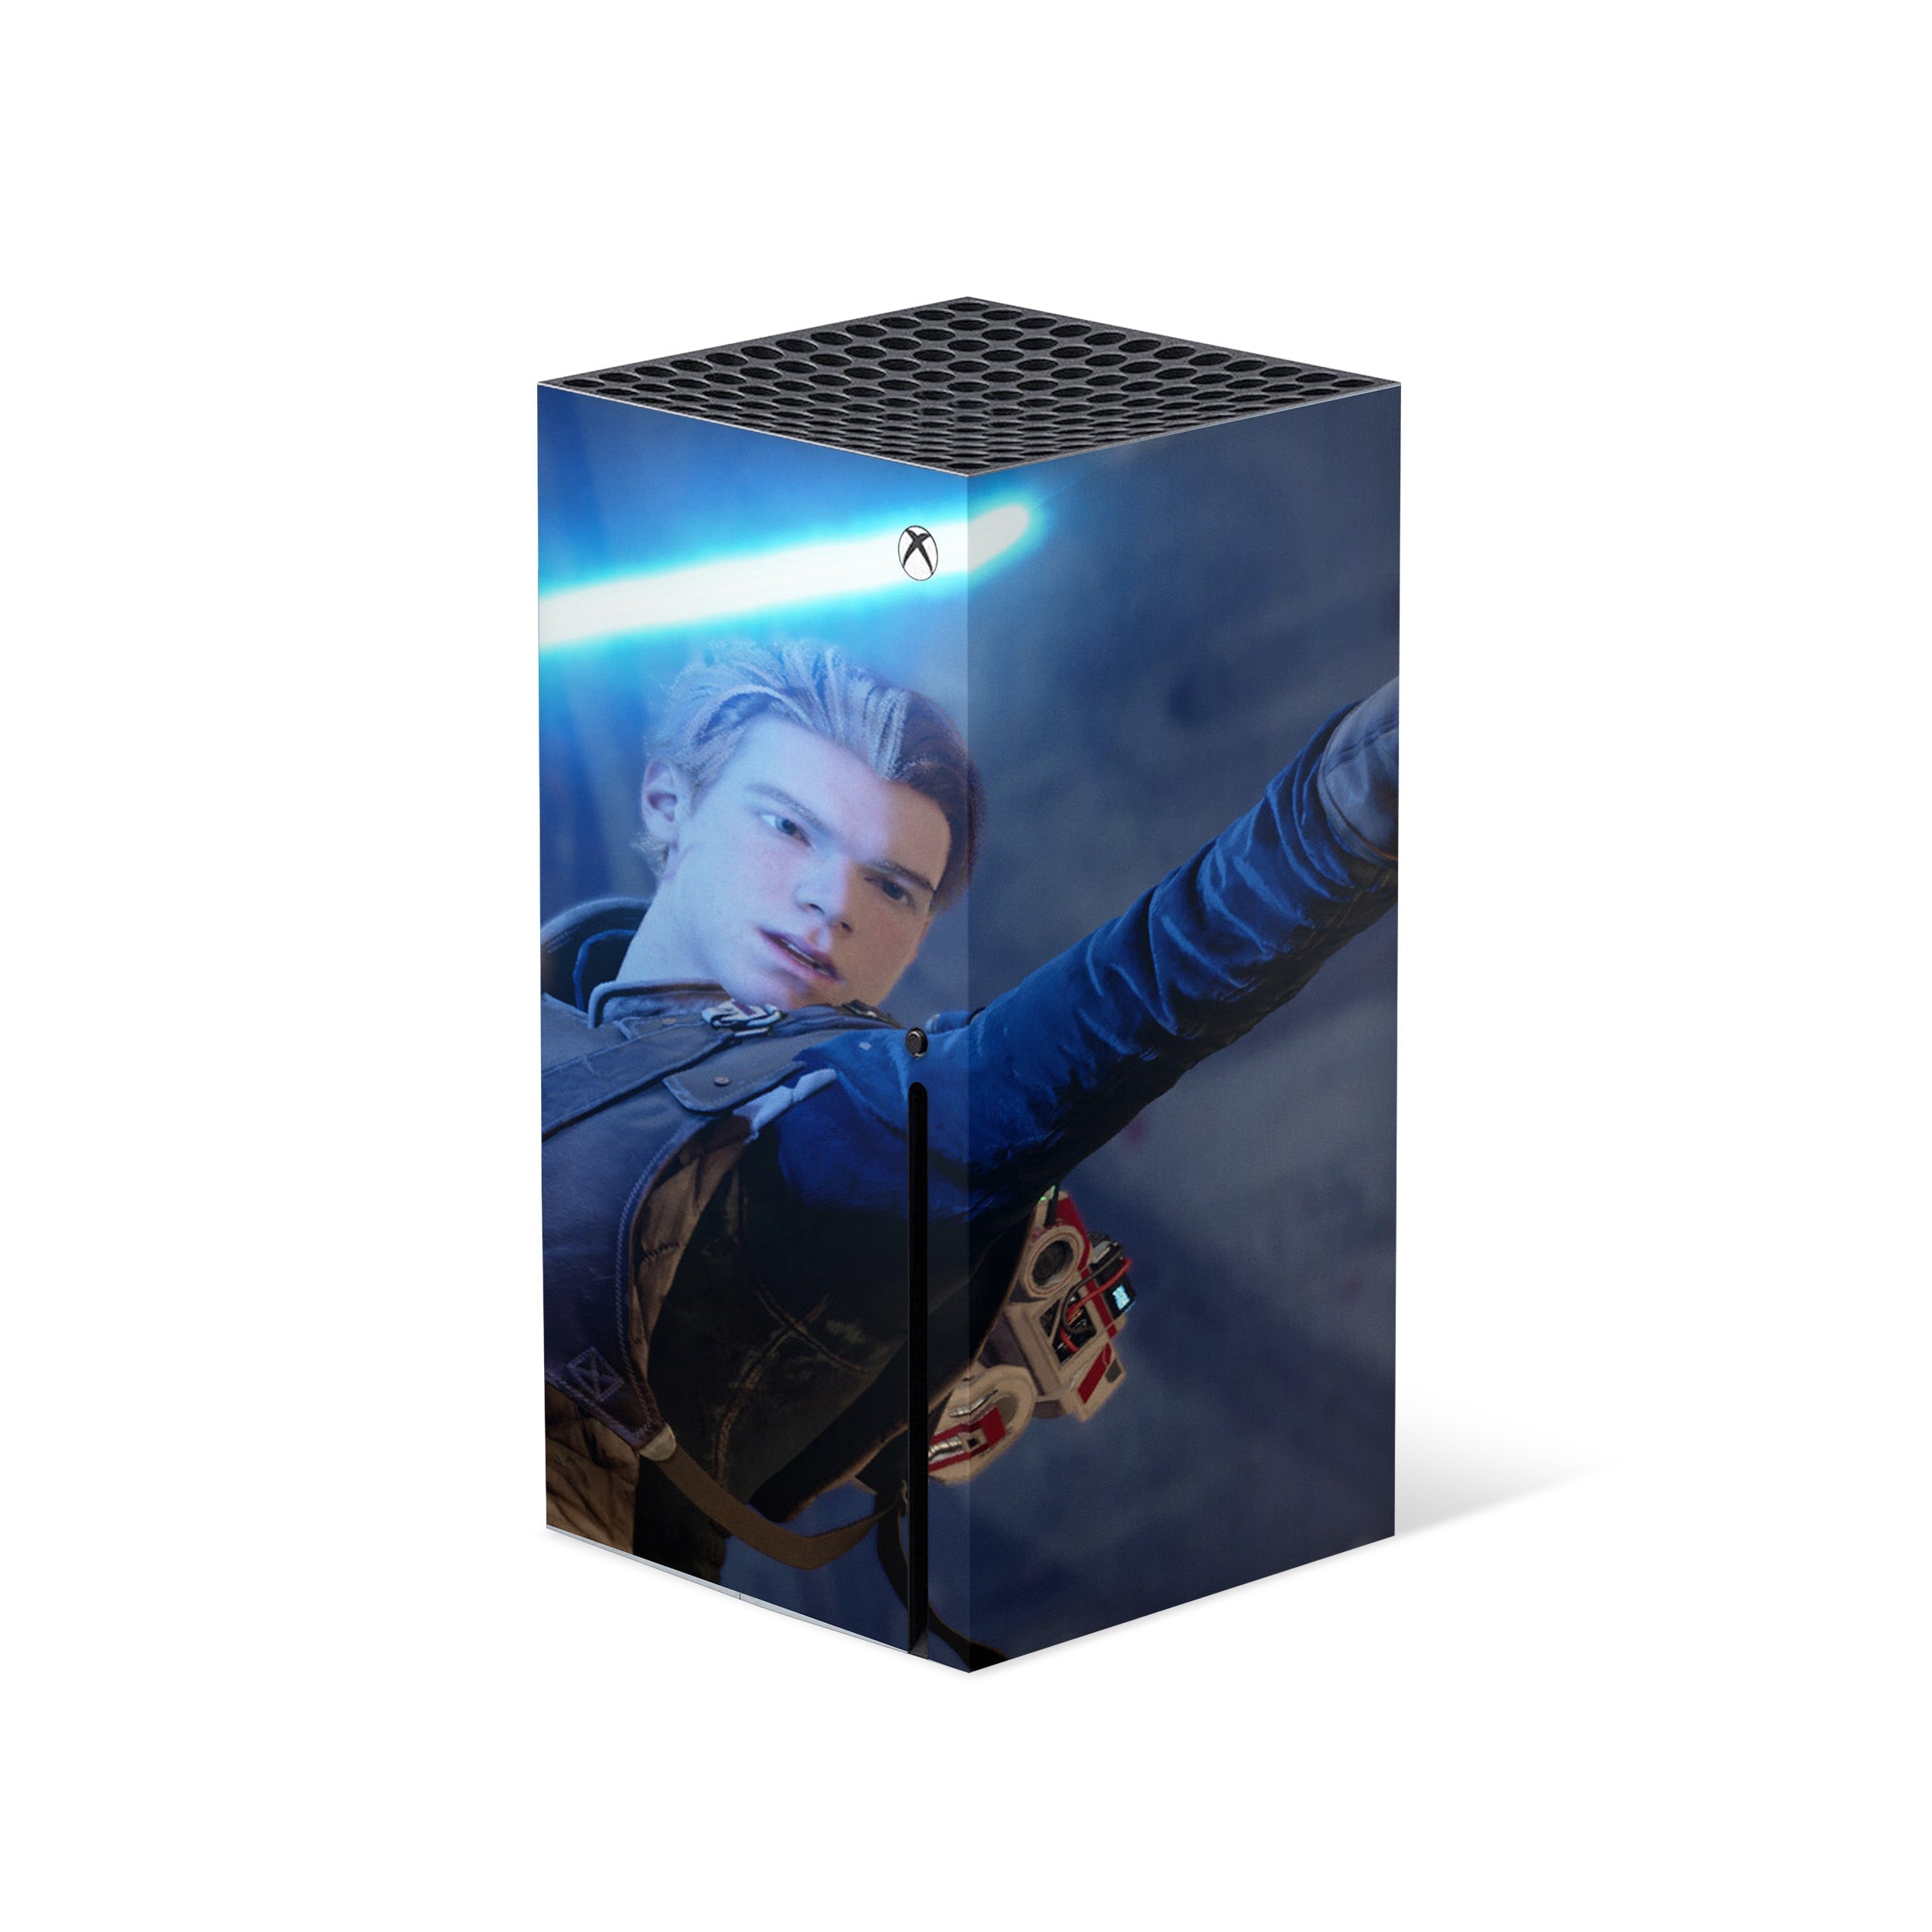 A video game skin featuring a Star Wars Jedi Fallen Order design for the Xbox Series X.